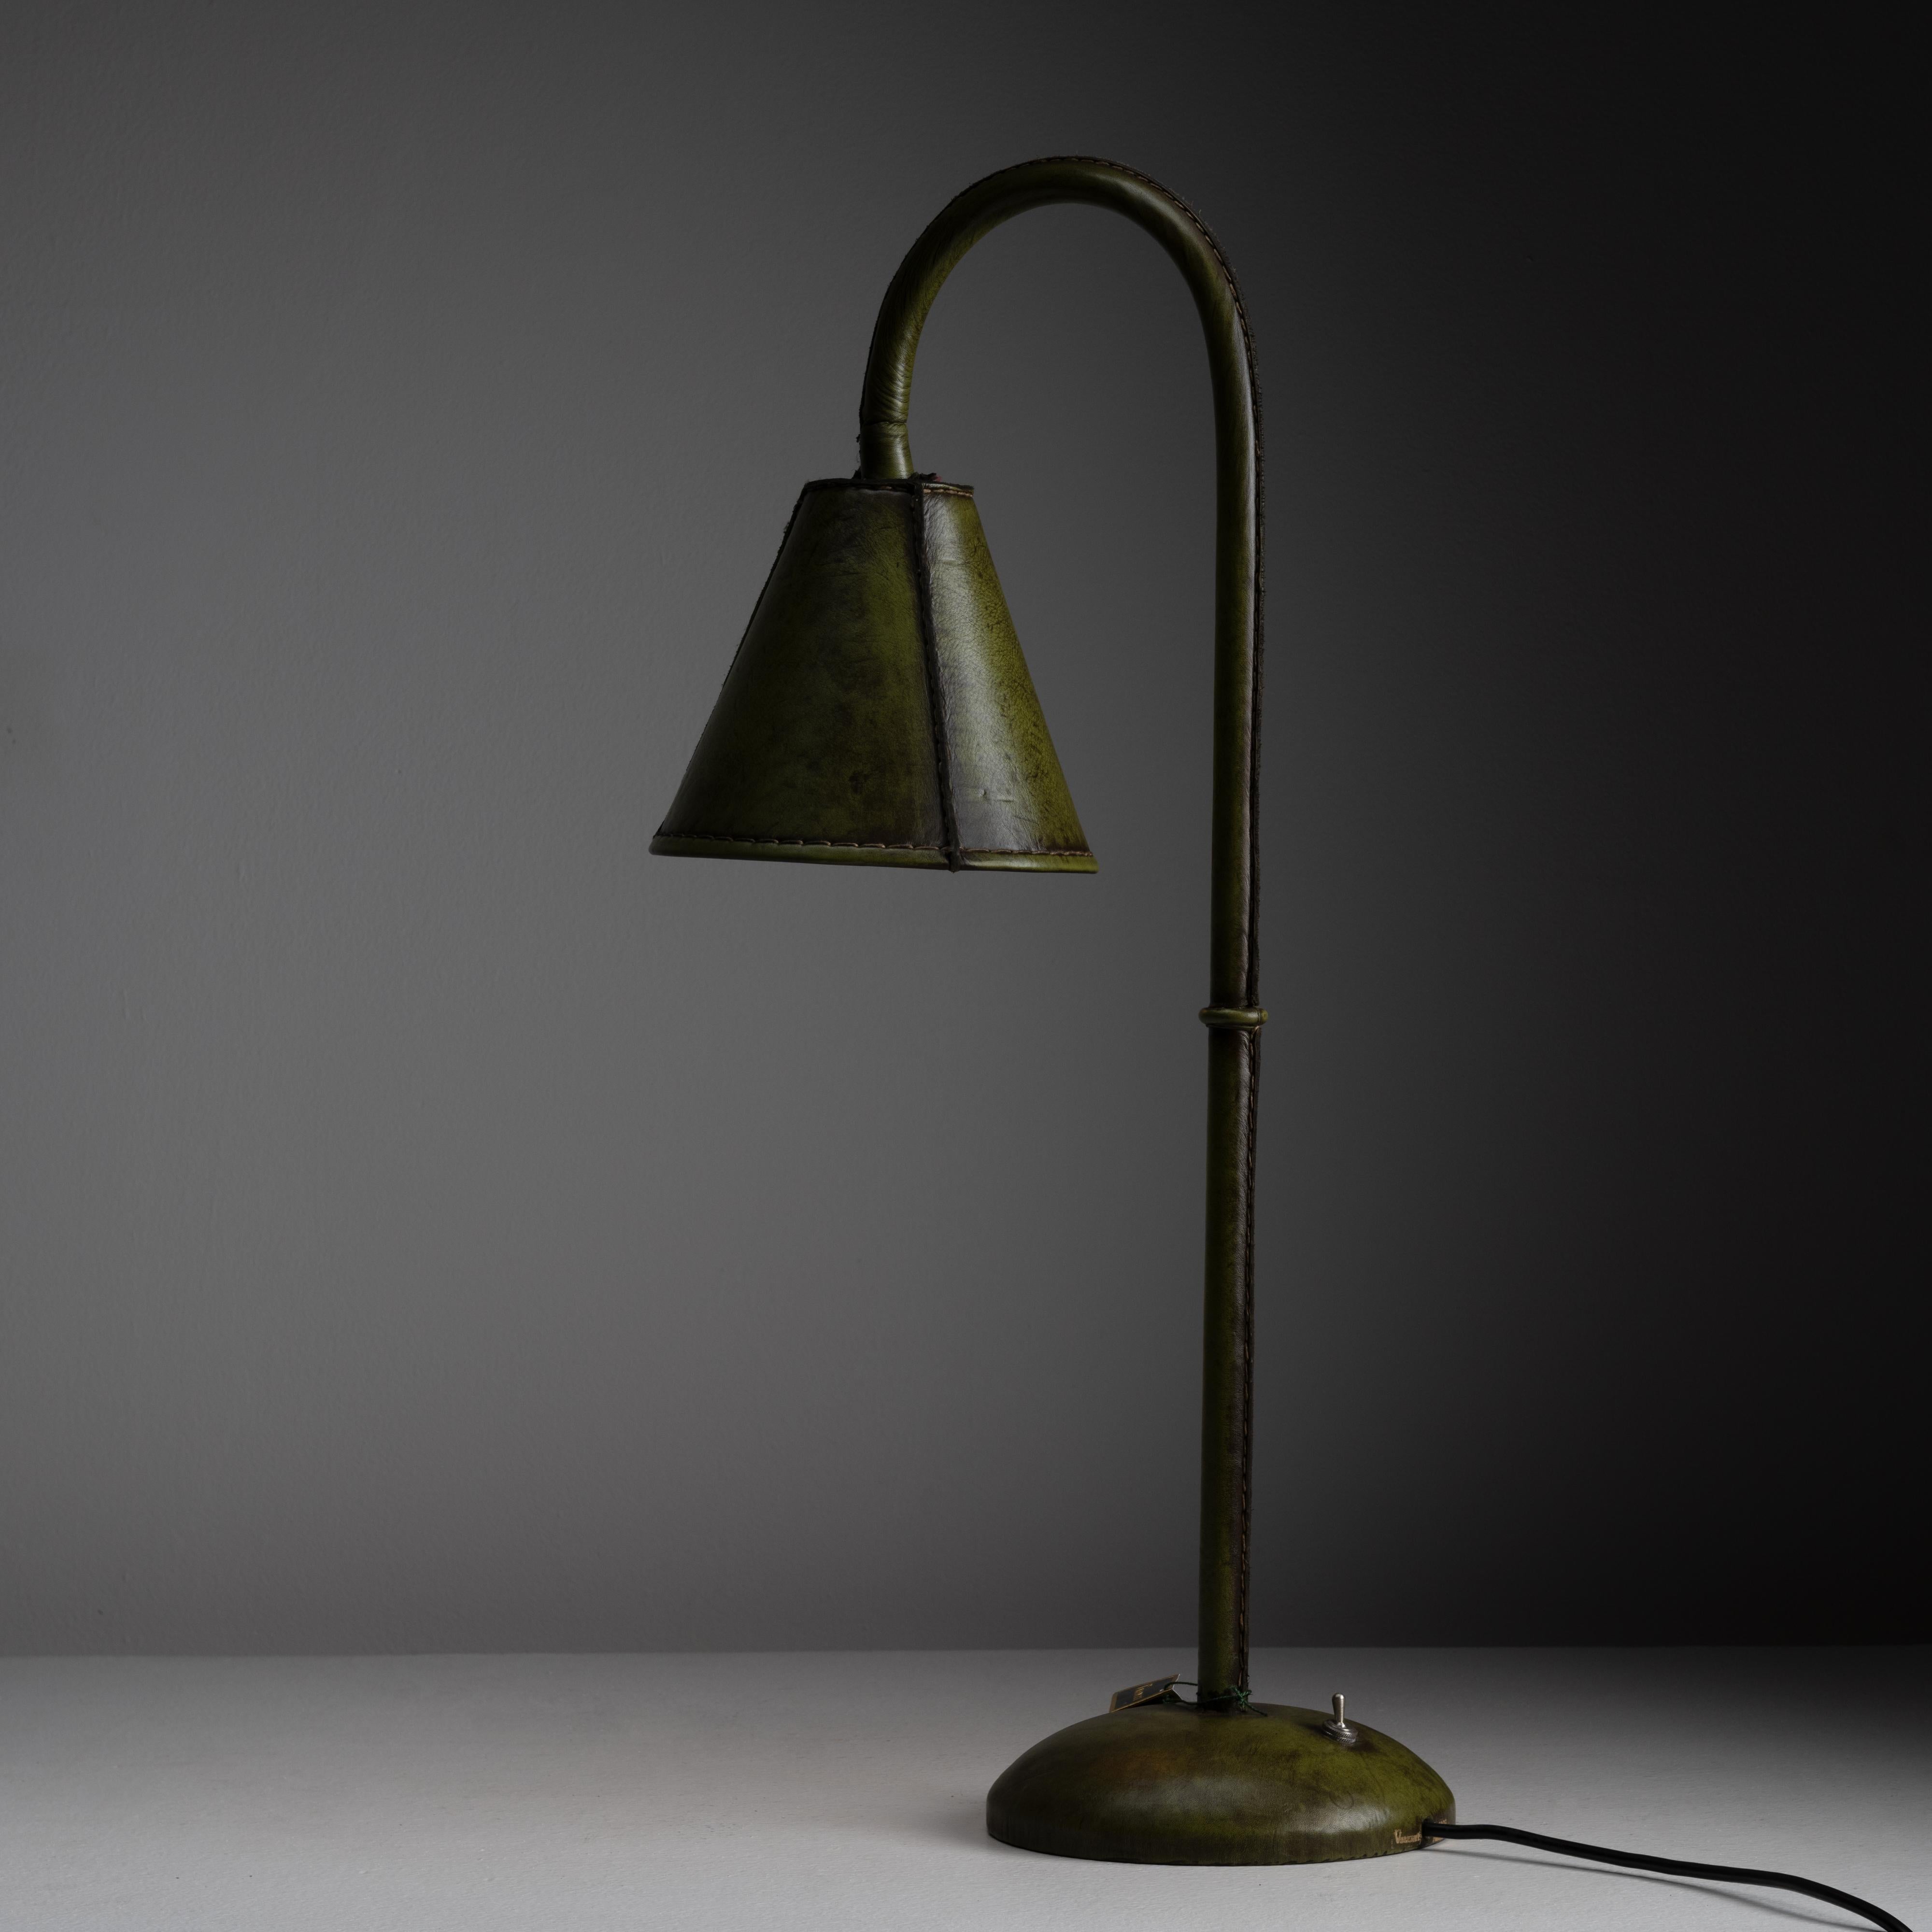 Green wrapped leather table lamp by Valenti. Designed and manufactured in Spain, circa the 1970s. Purchased as dead stock. Fully wrapped leather table lamps with a shade that swivels. On and off toggle switch at the base. Holds one E27 socket type,